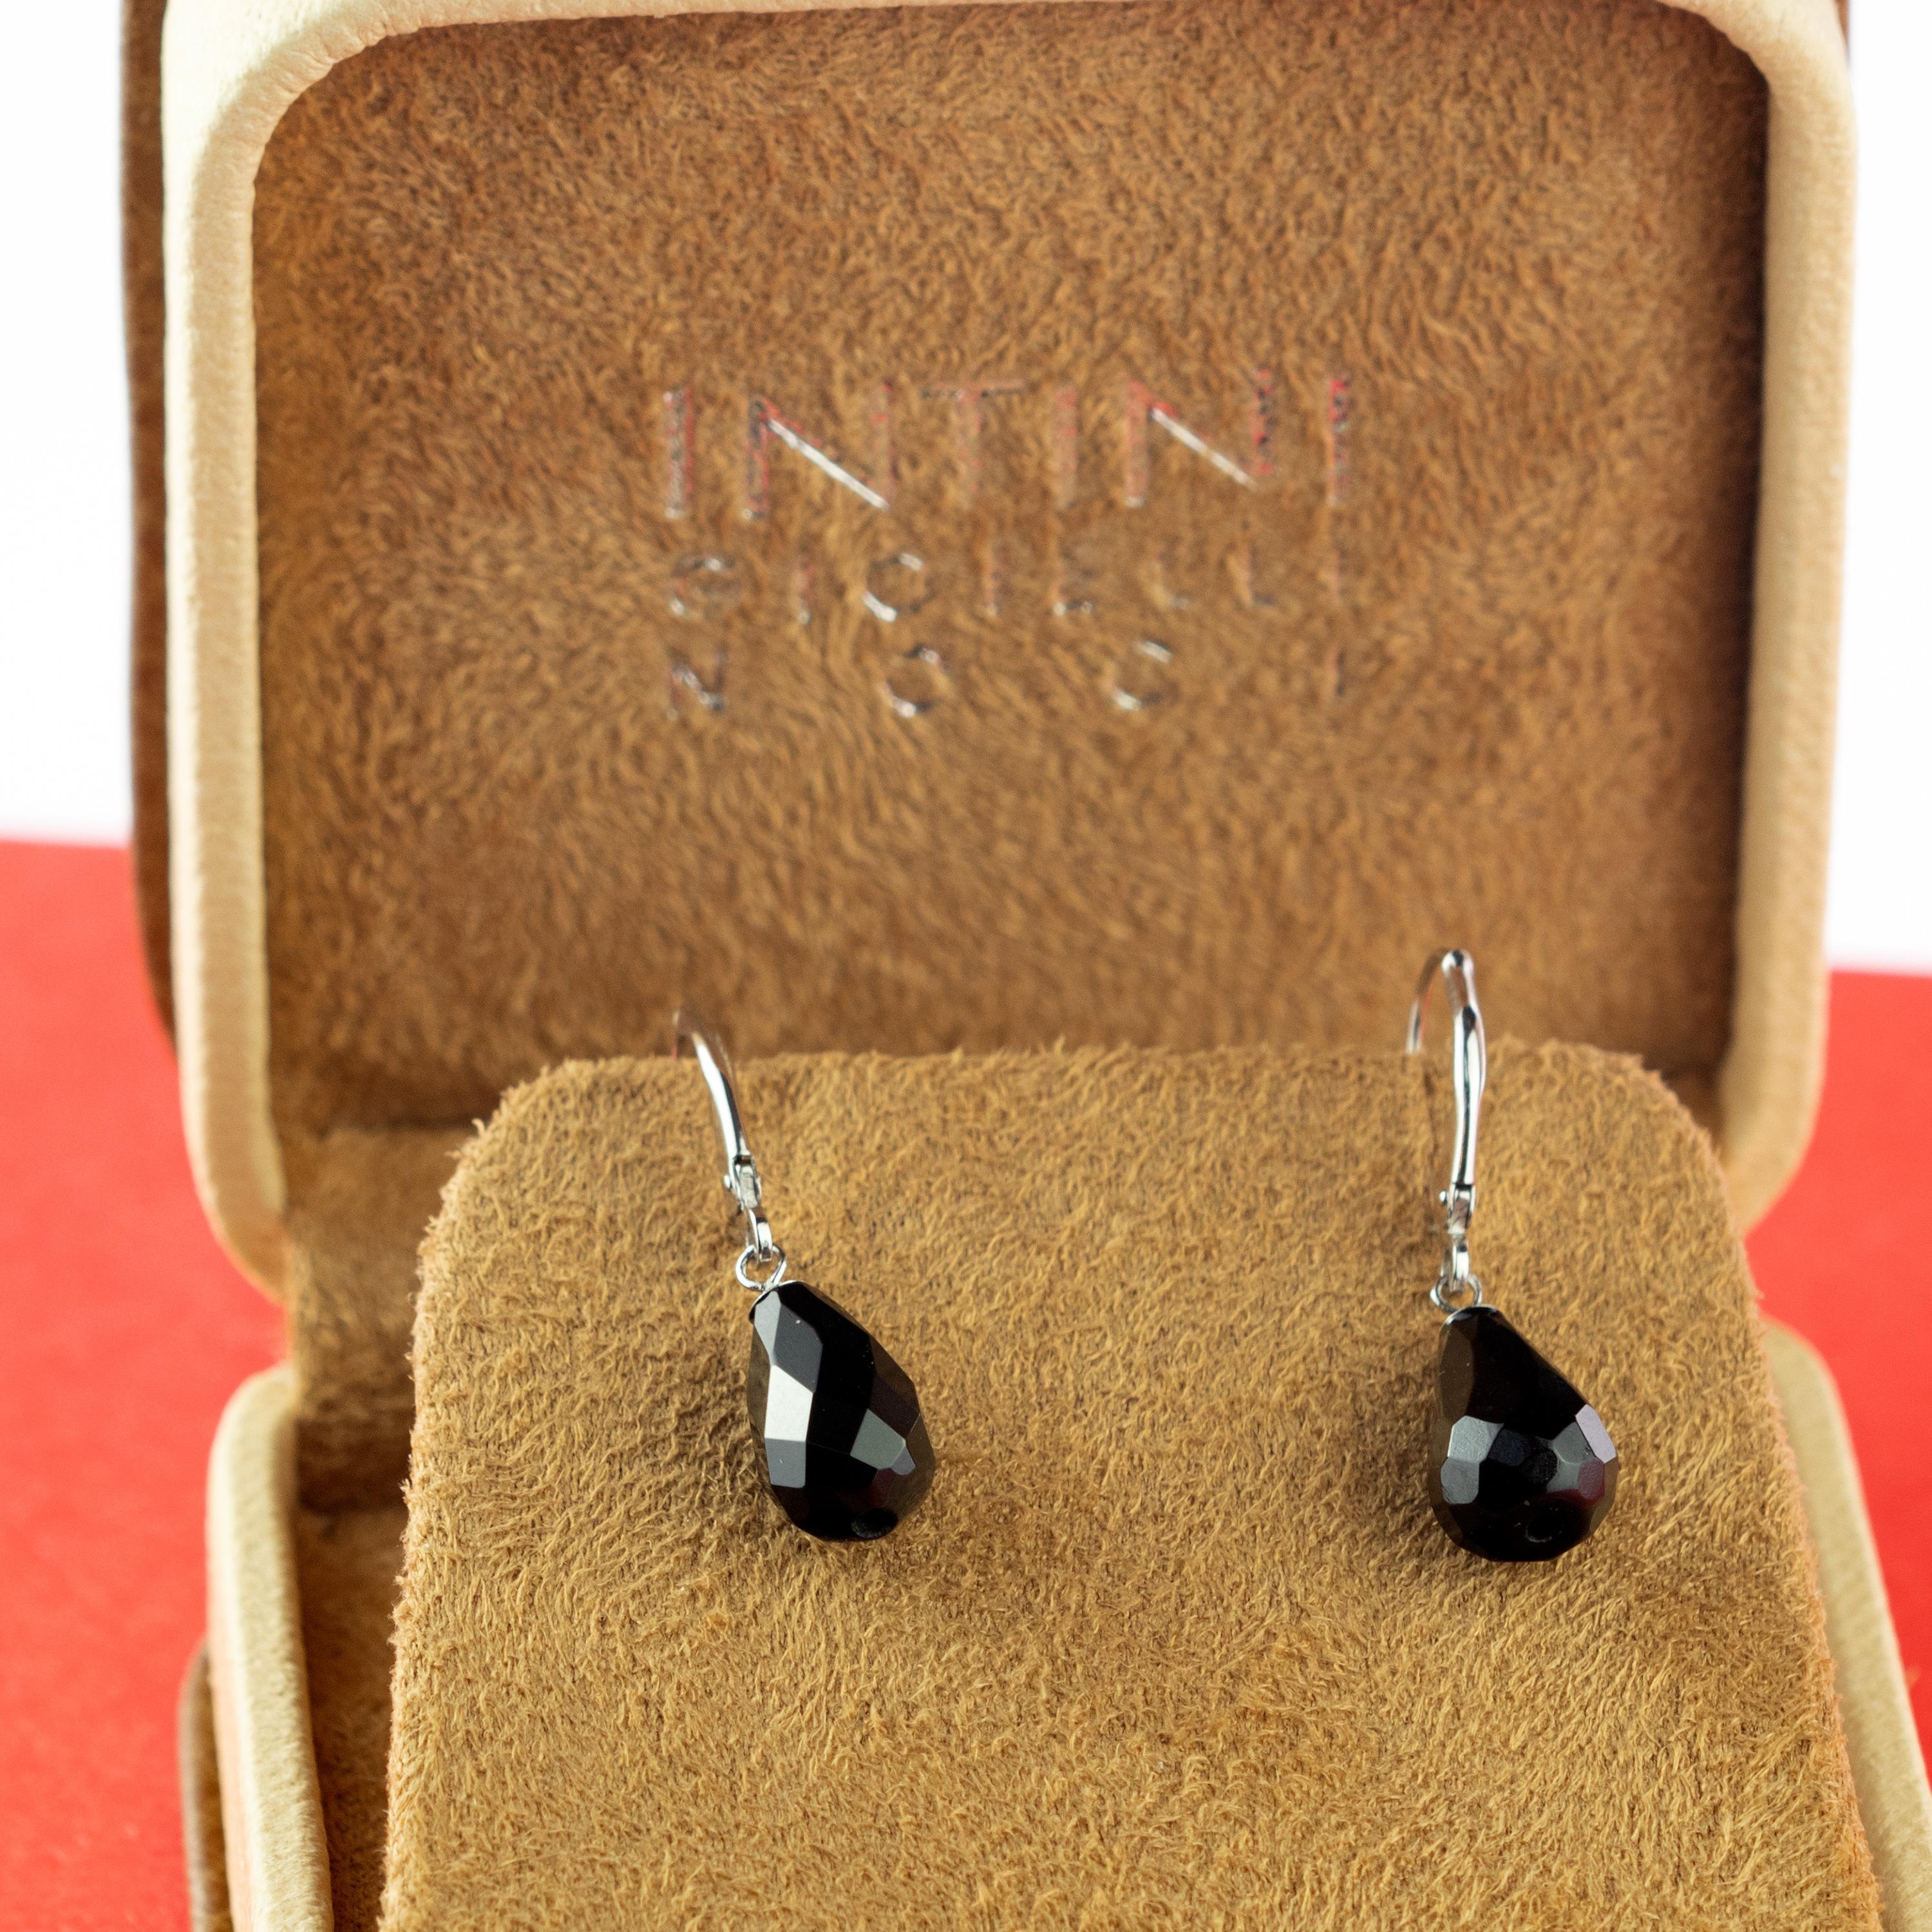 Breathtaking black faceted agate earrings have modern Leverback clousure and 18 k white gold design and the most precious stones. These earrings are the perfect glamorous jewelry for a daily occasion.

These earrings are inspired by the black color